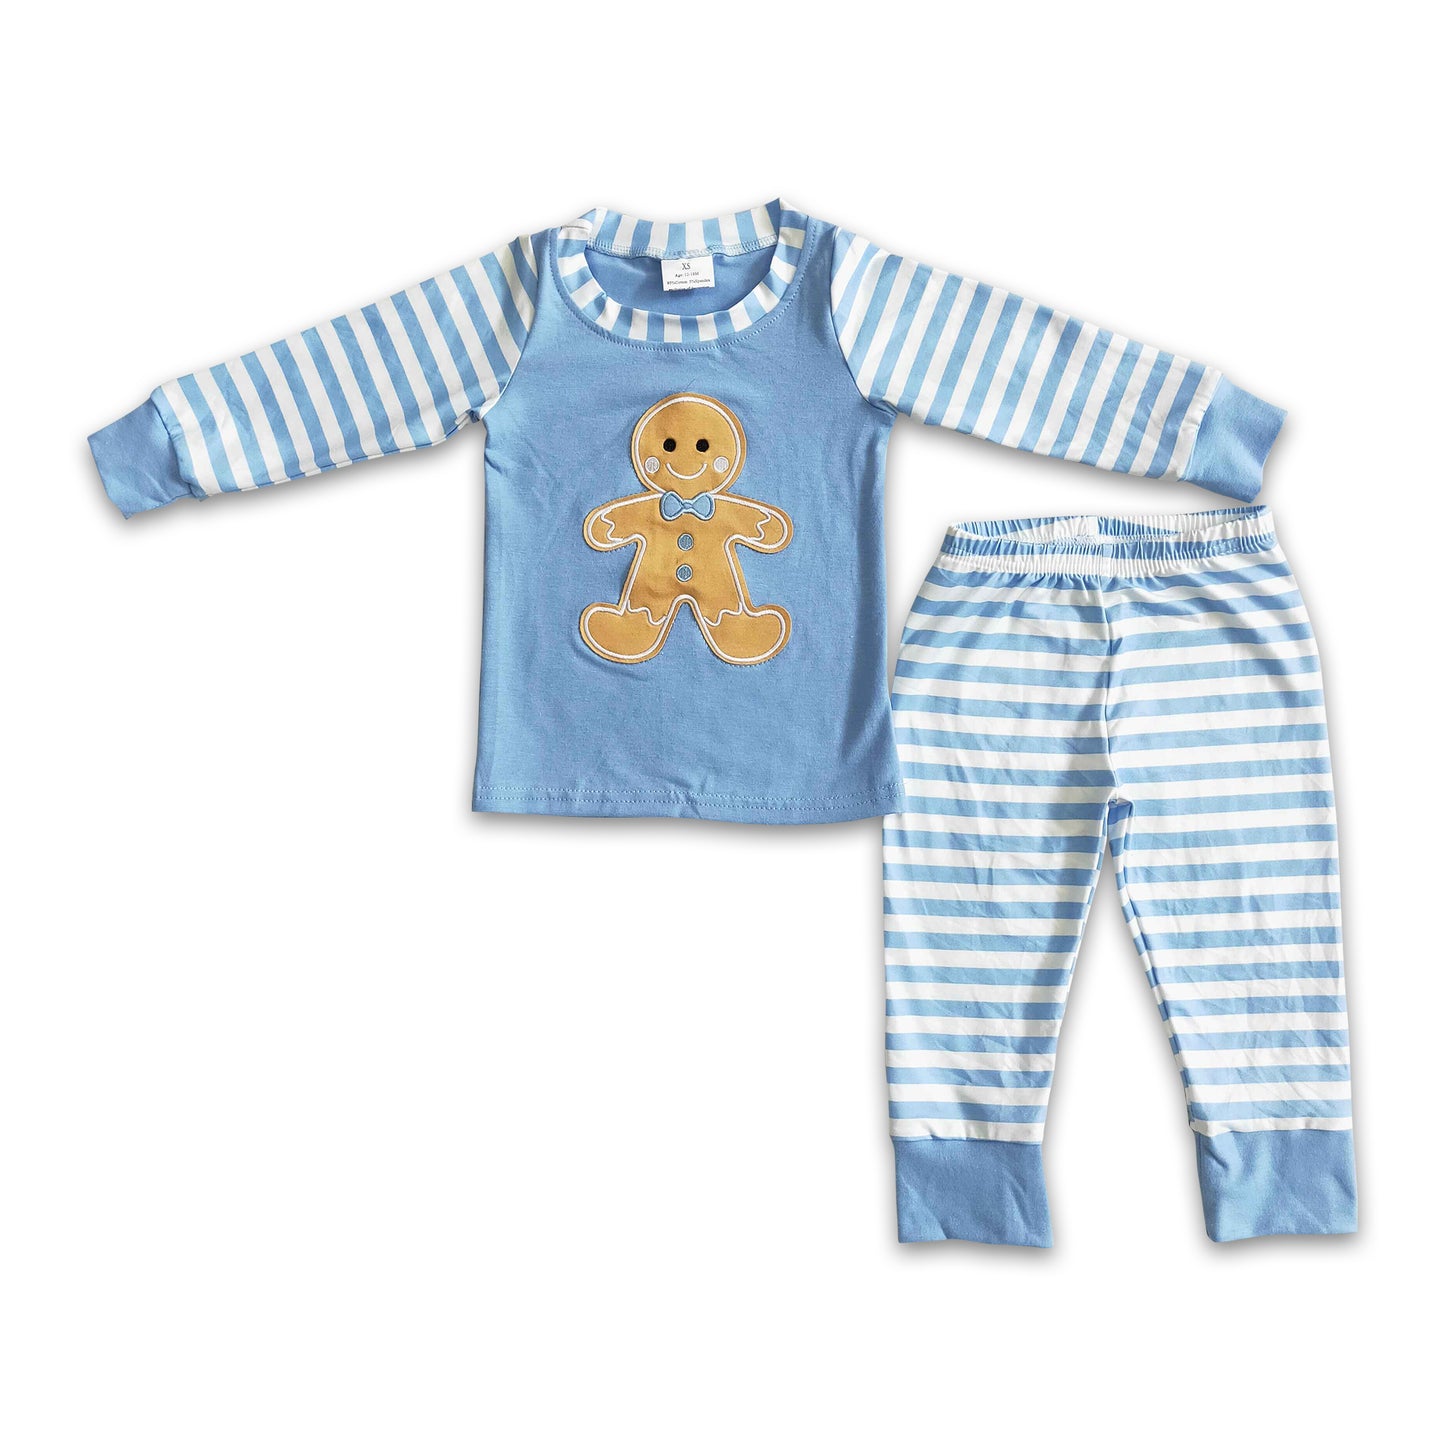 Gingerbread embroidery cotton blue top stirpe boy Christmas pjs